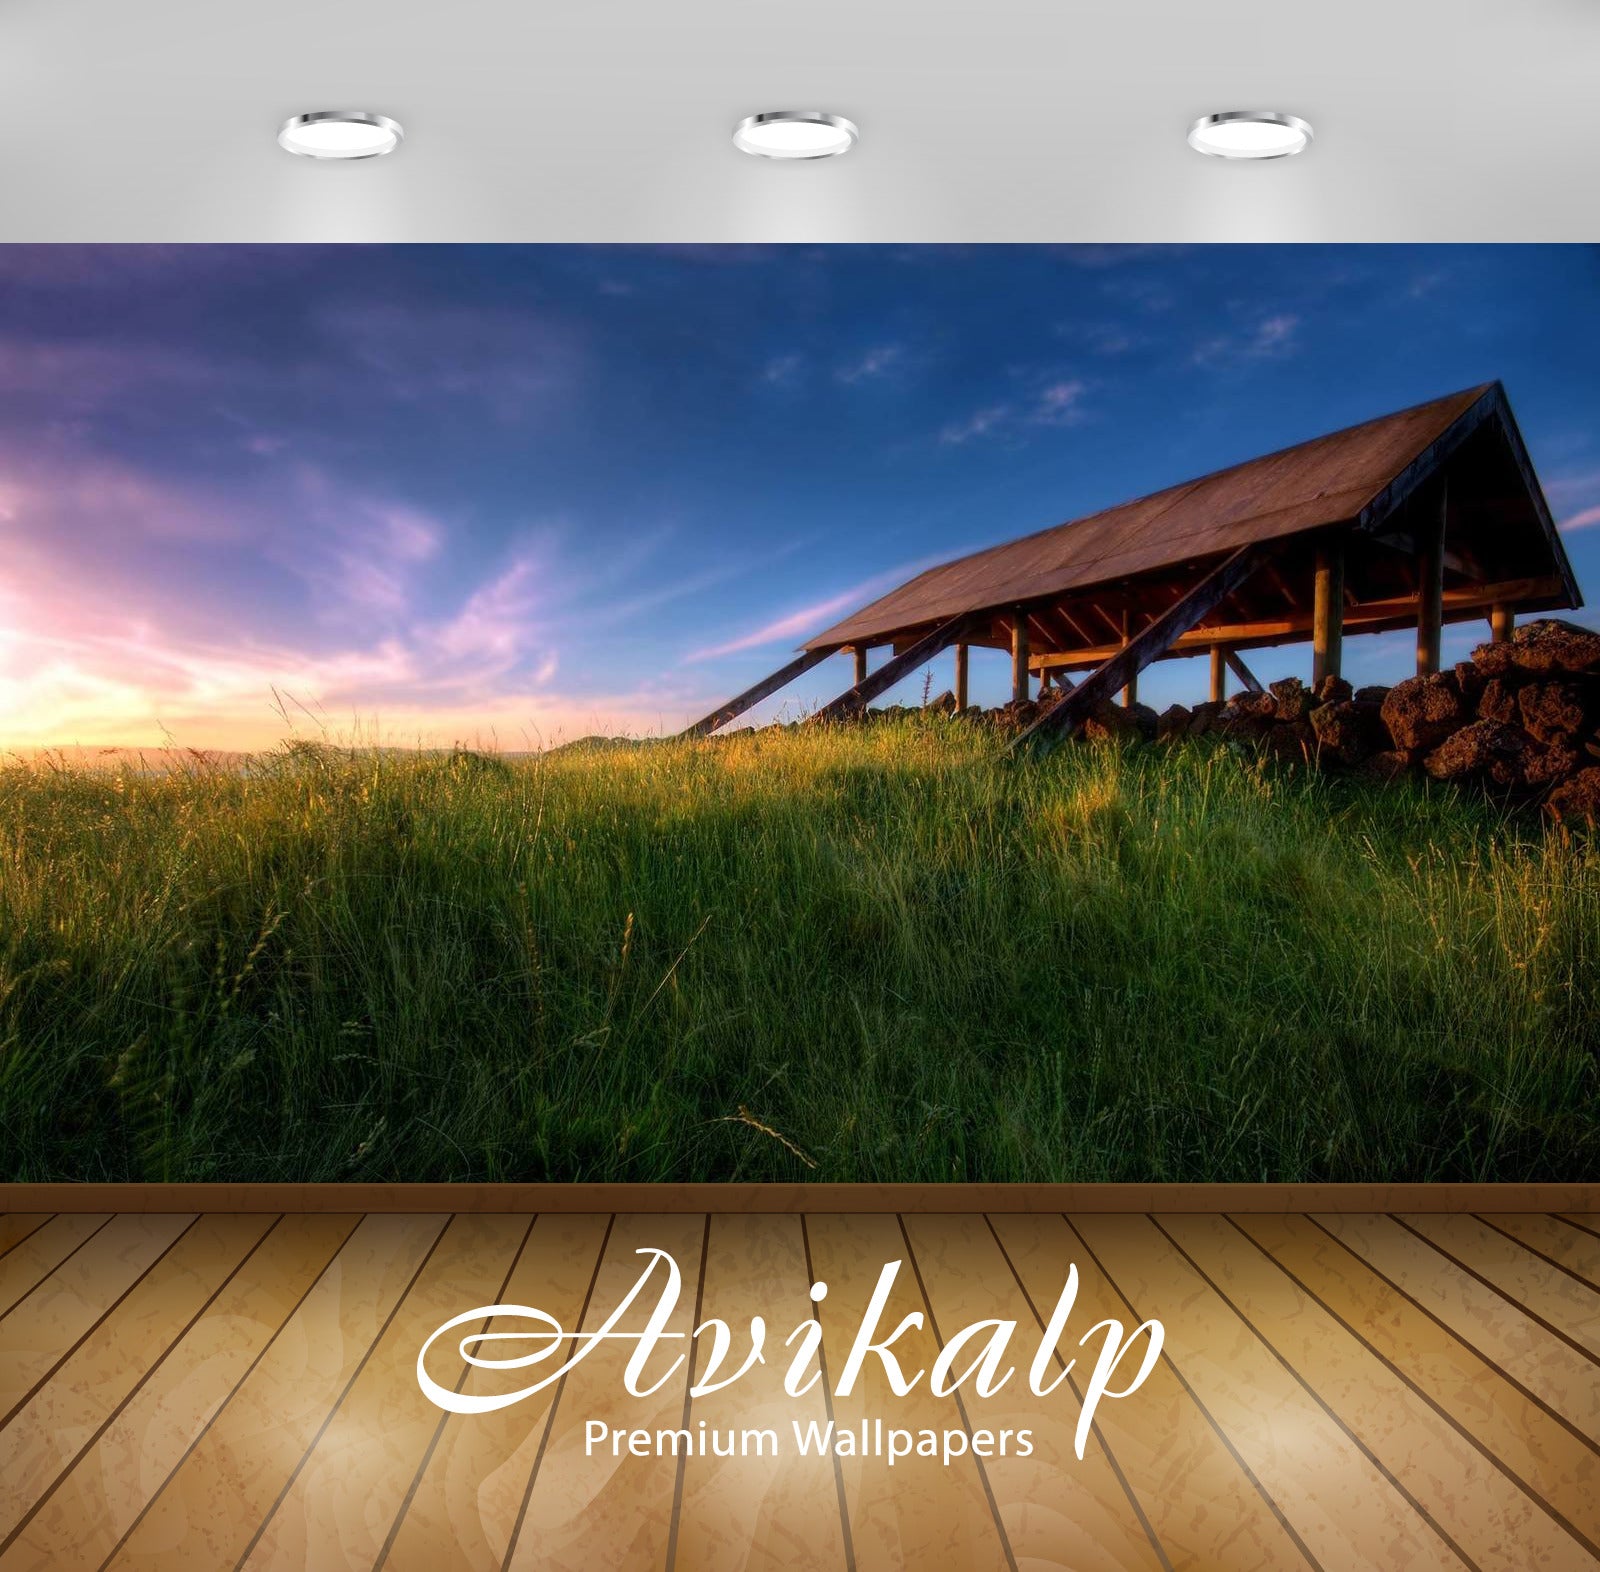 Avikalp Exclusive Awi1516 Farm Nature Scenery Full HD Wallpapers for Living room, Hall, Kids Room, K